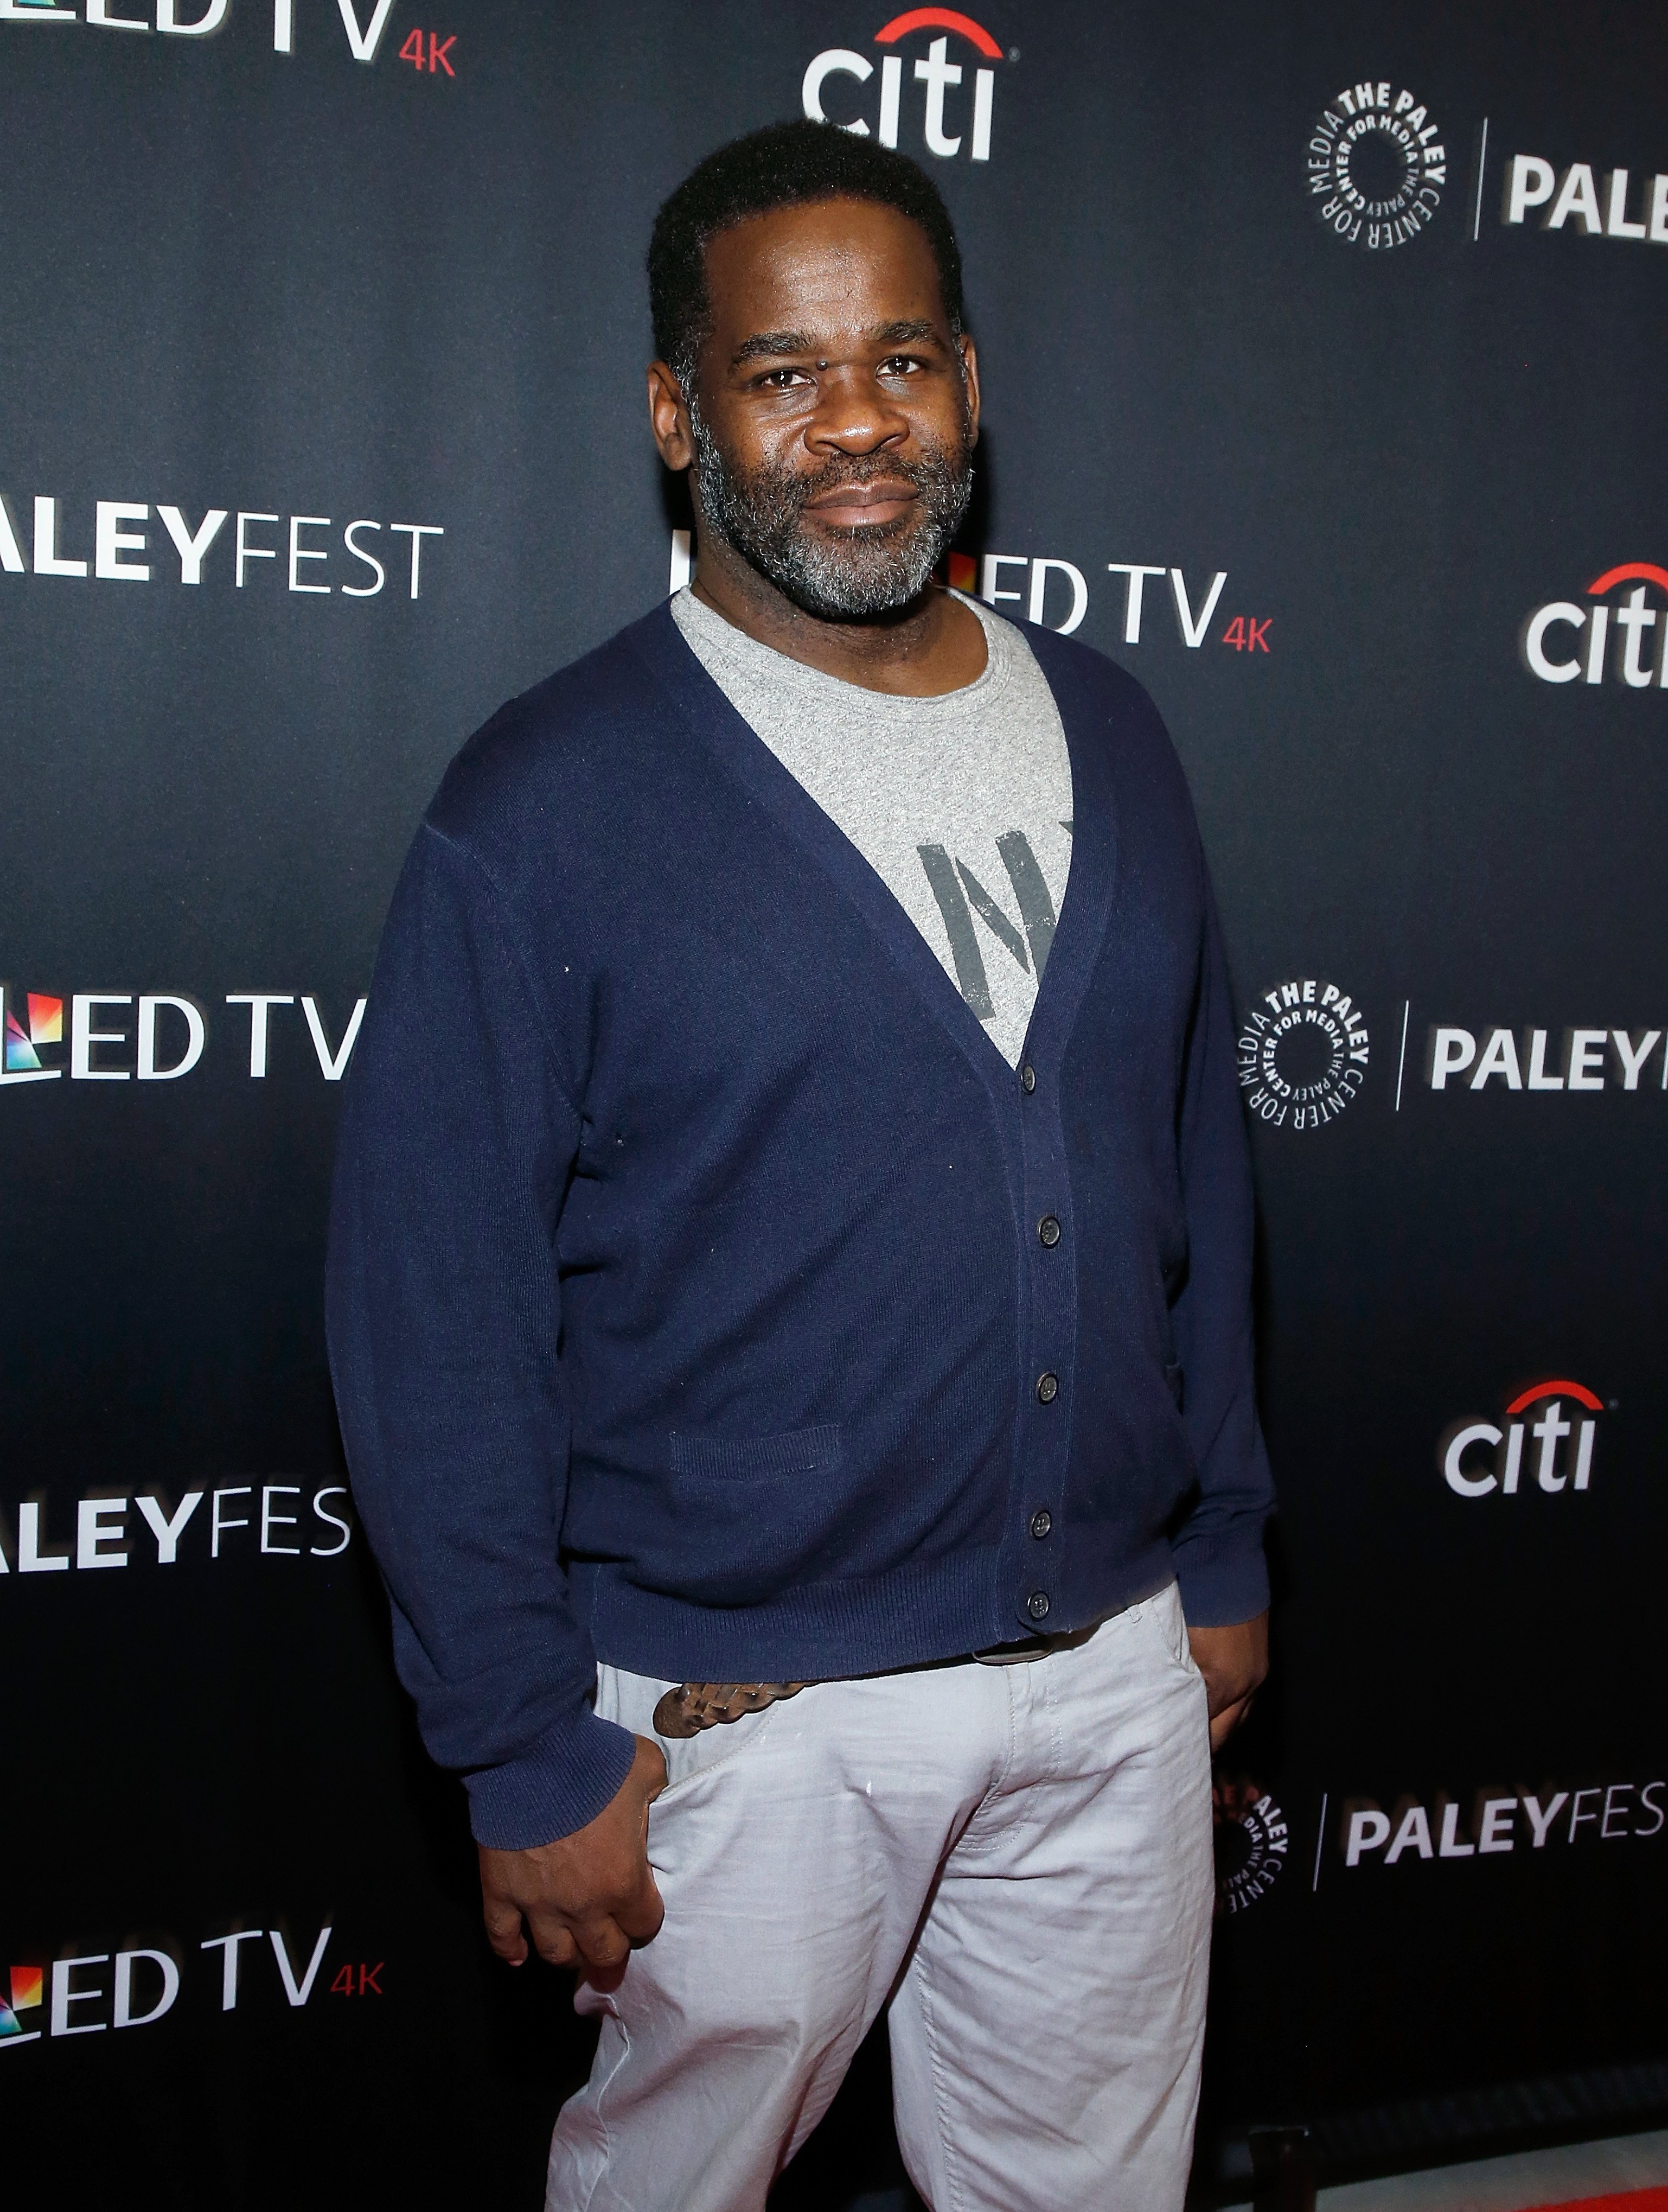 Craig Grant attends the "Oz" Reunion during the 2017 PaleyFest NY on October 15, 2017 in New York City. | Photo: Getty Images